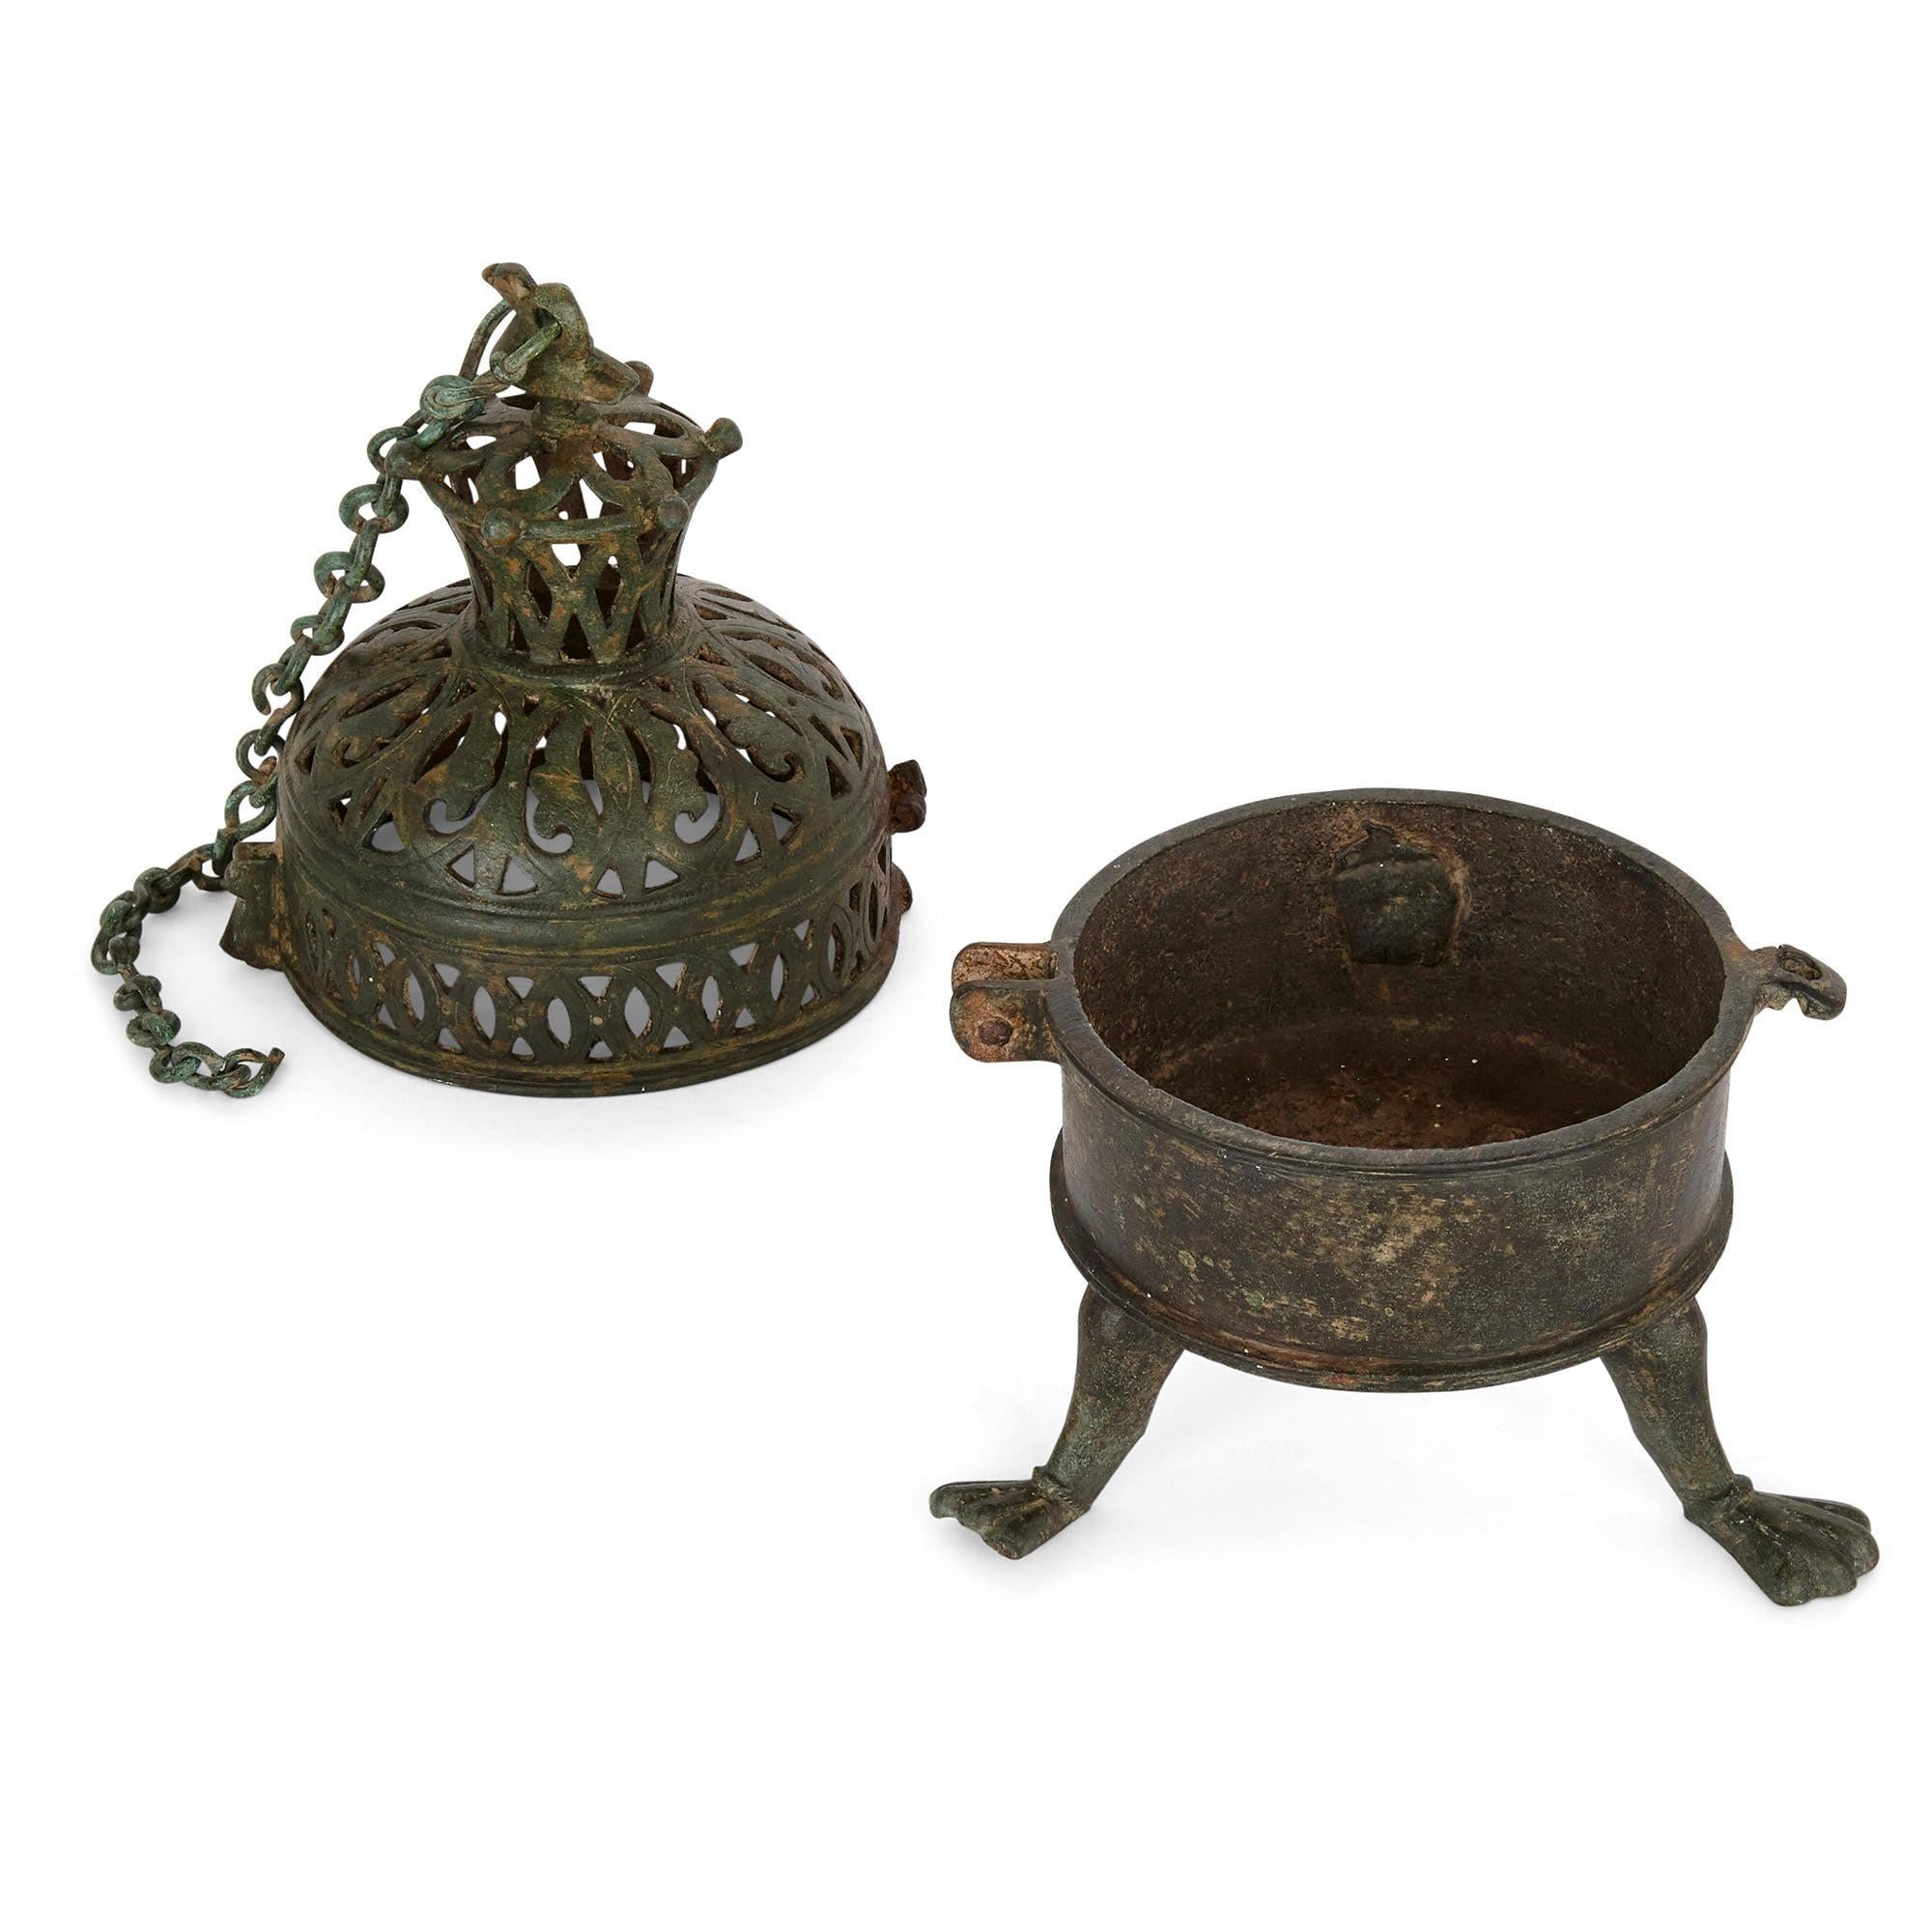 Moorish incense burner from Spain, dated to 10th-12th century
Spanish, 10th-12th century
Measures: Burner height 20cm, width 12cm, depth 12cm
Box height 23cm, width 21cm, depth 18cm

This rare object is a bronze incense burner. The burner was